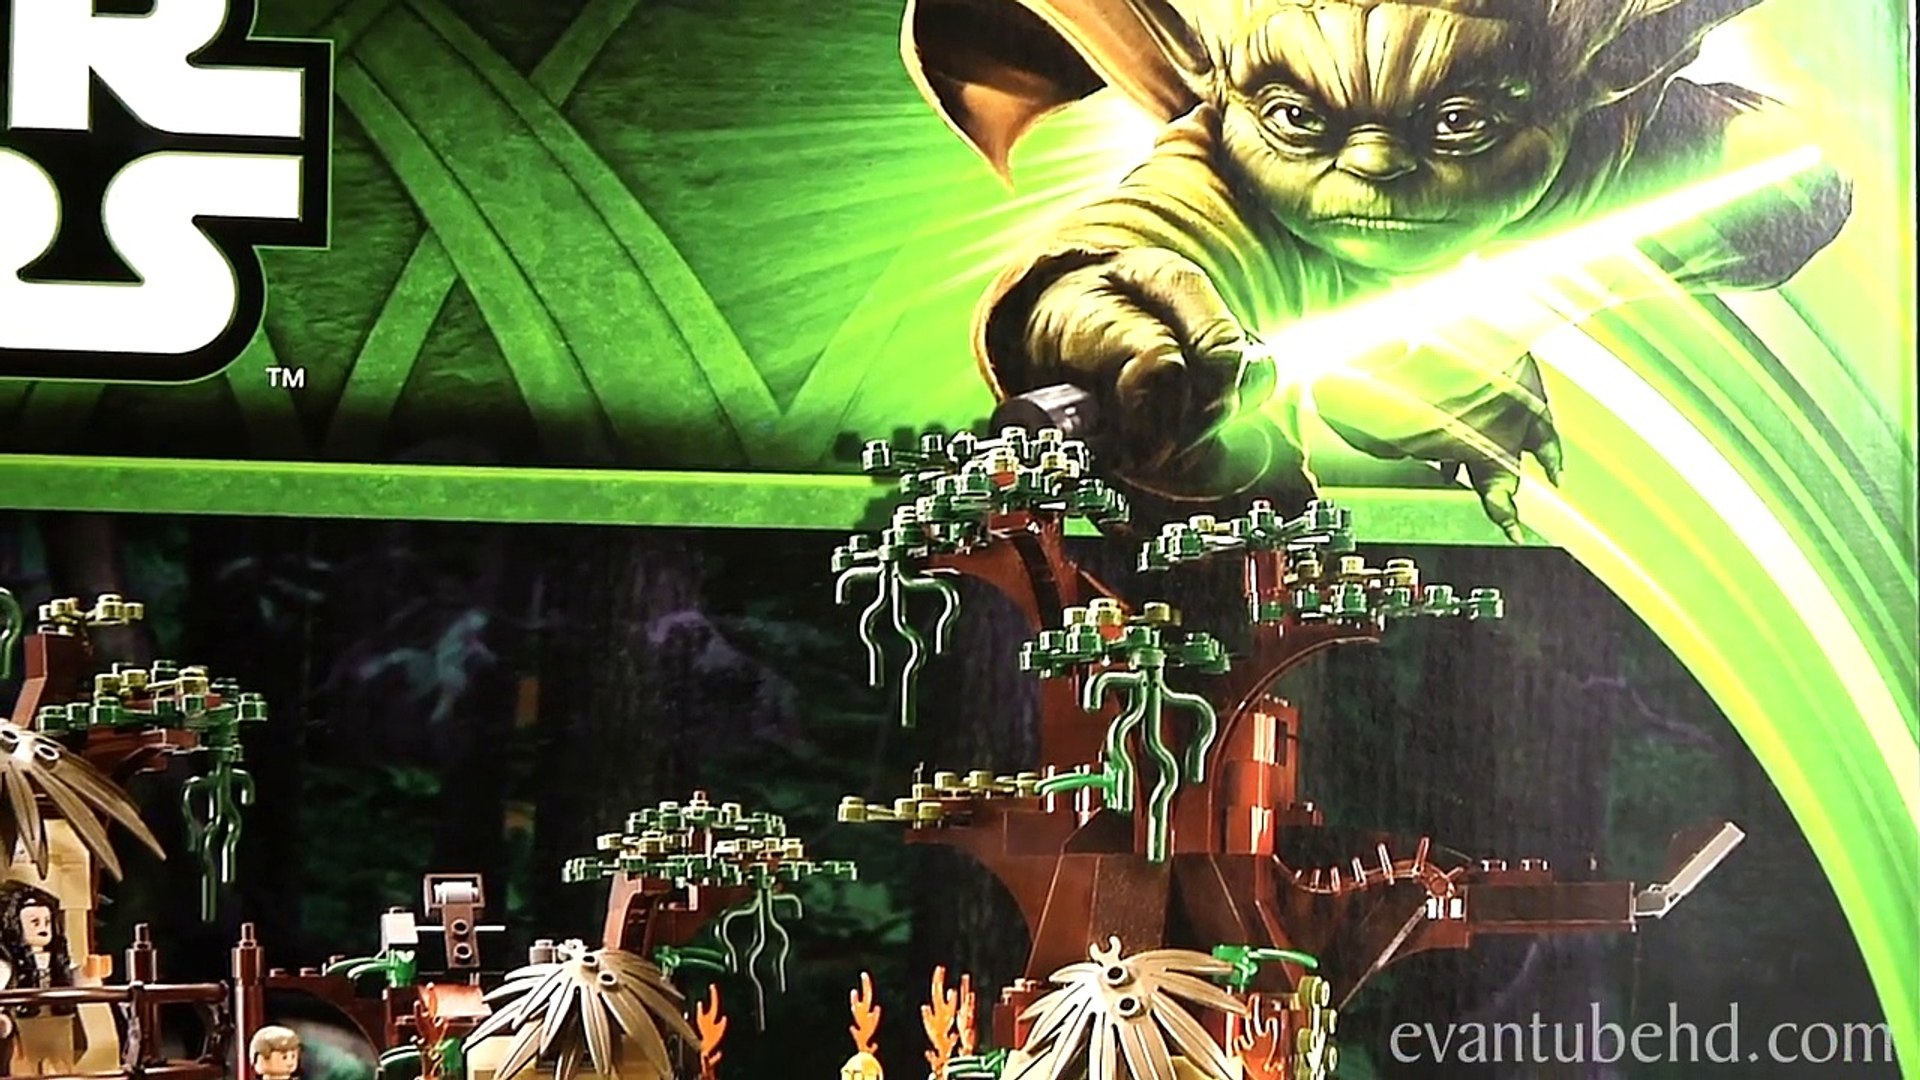 EWOK VILLAGE LEGO Star Wars Set 10236 Time lapse, Unboxing & Review -  Dailymotion Video